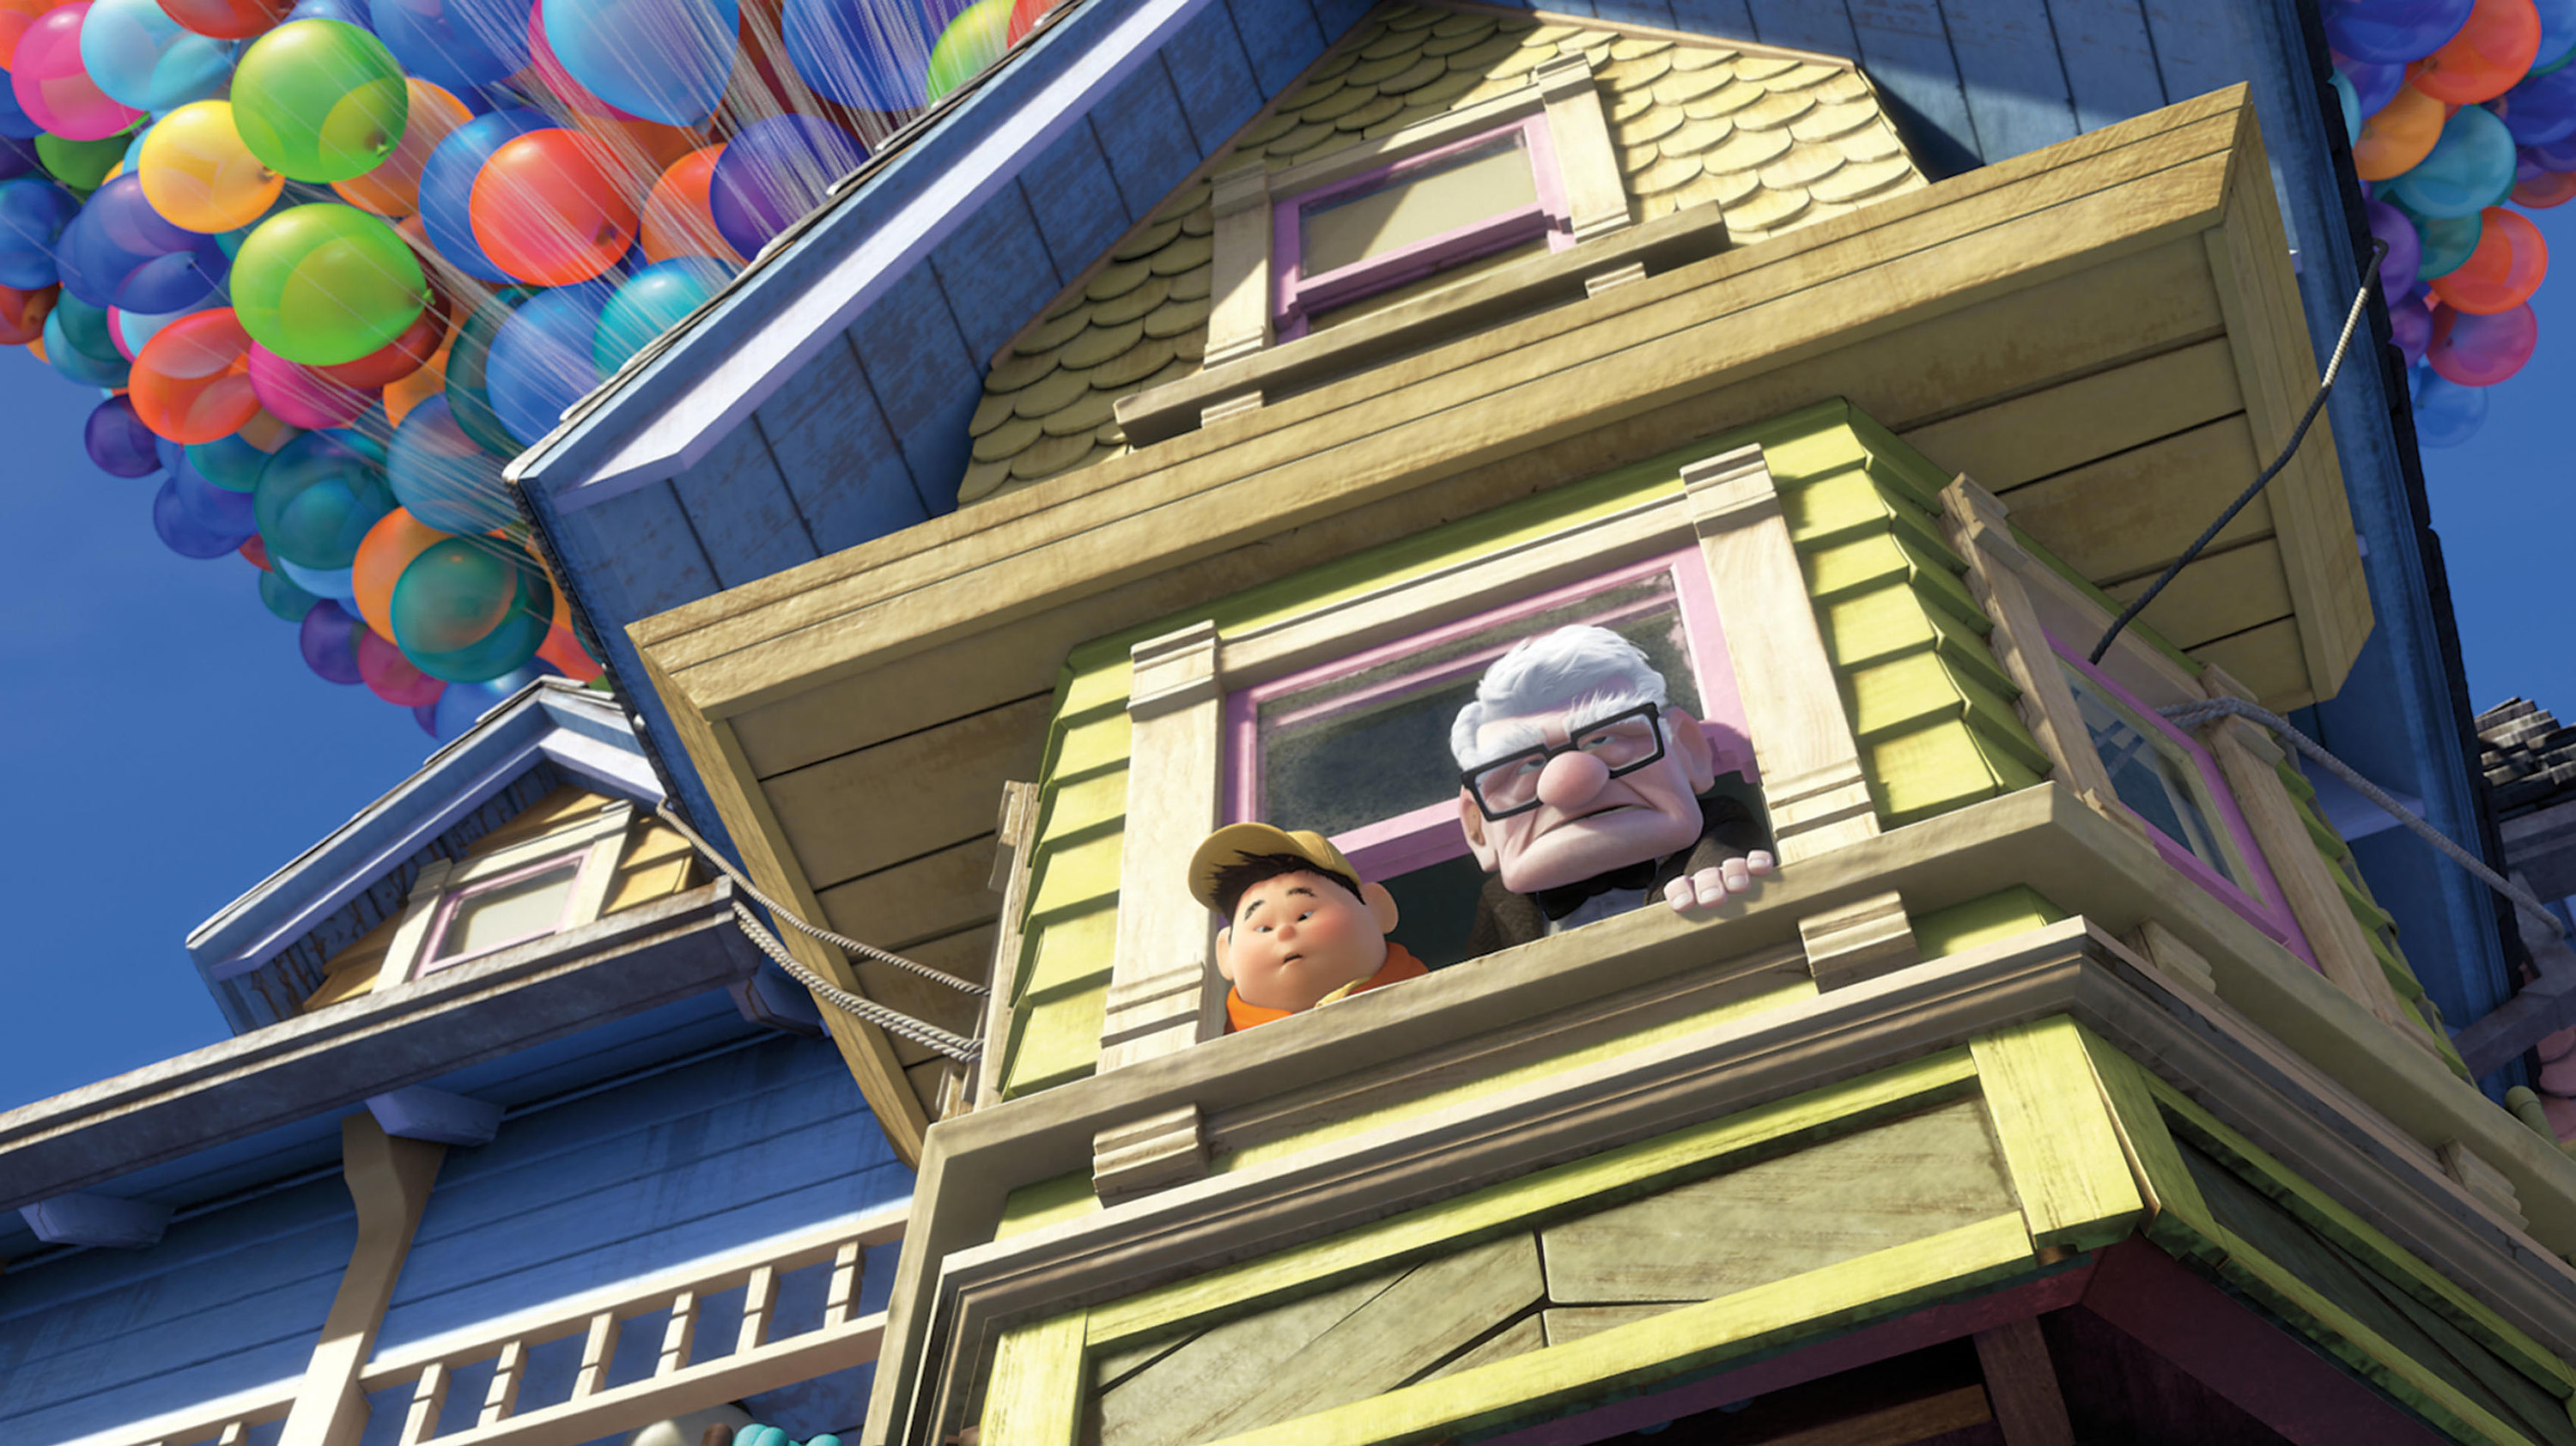 An animated older man and a young boy looking out of a house window with balloons above them